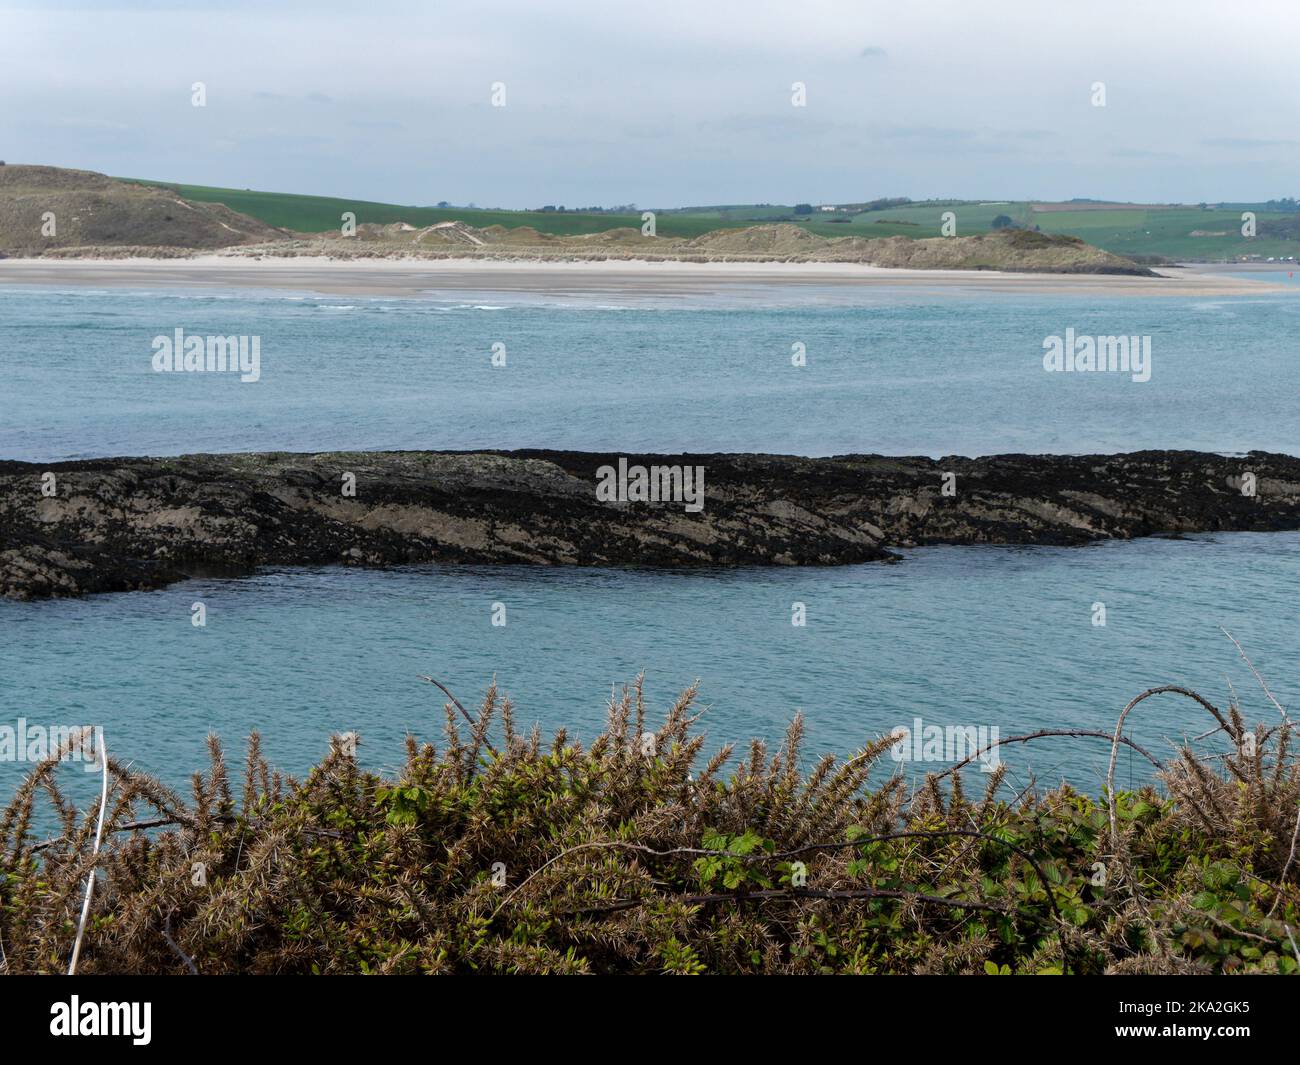 Dense bushes. View of Clonakilty Bay. Sea rocks. A picturesque place in Europe, rock near water. The nature of Ireland. Stock Photo